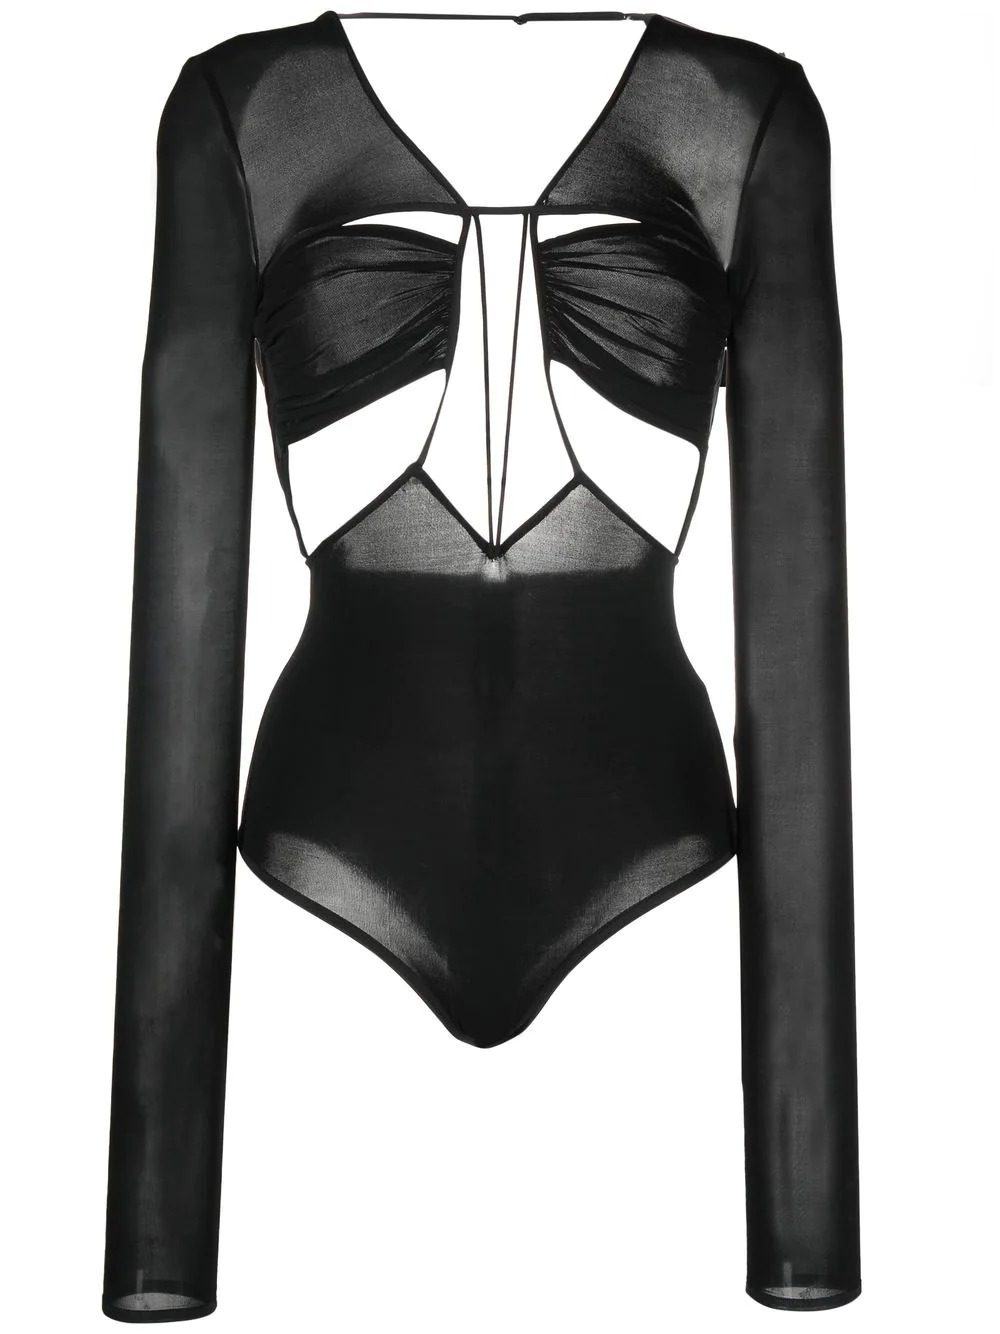 ASOS Louanna Long Sleeve Mesh Cut Out Strappy Bodysuit in Black